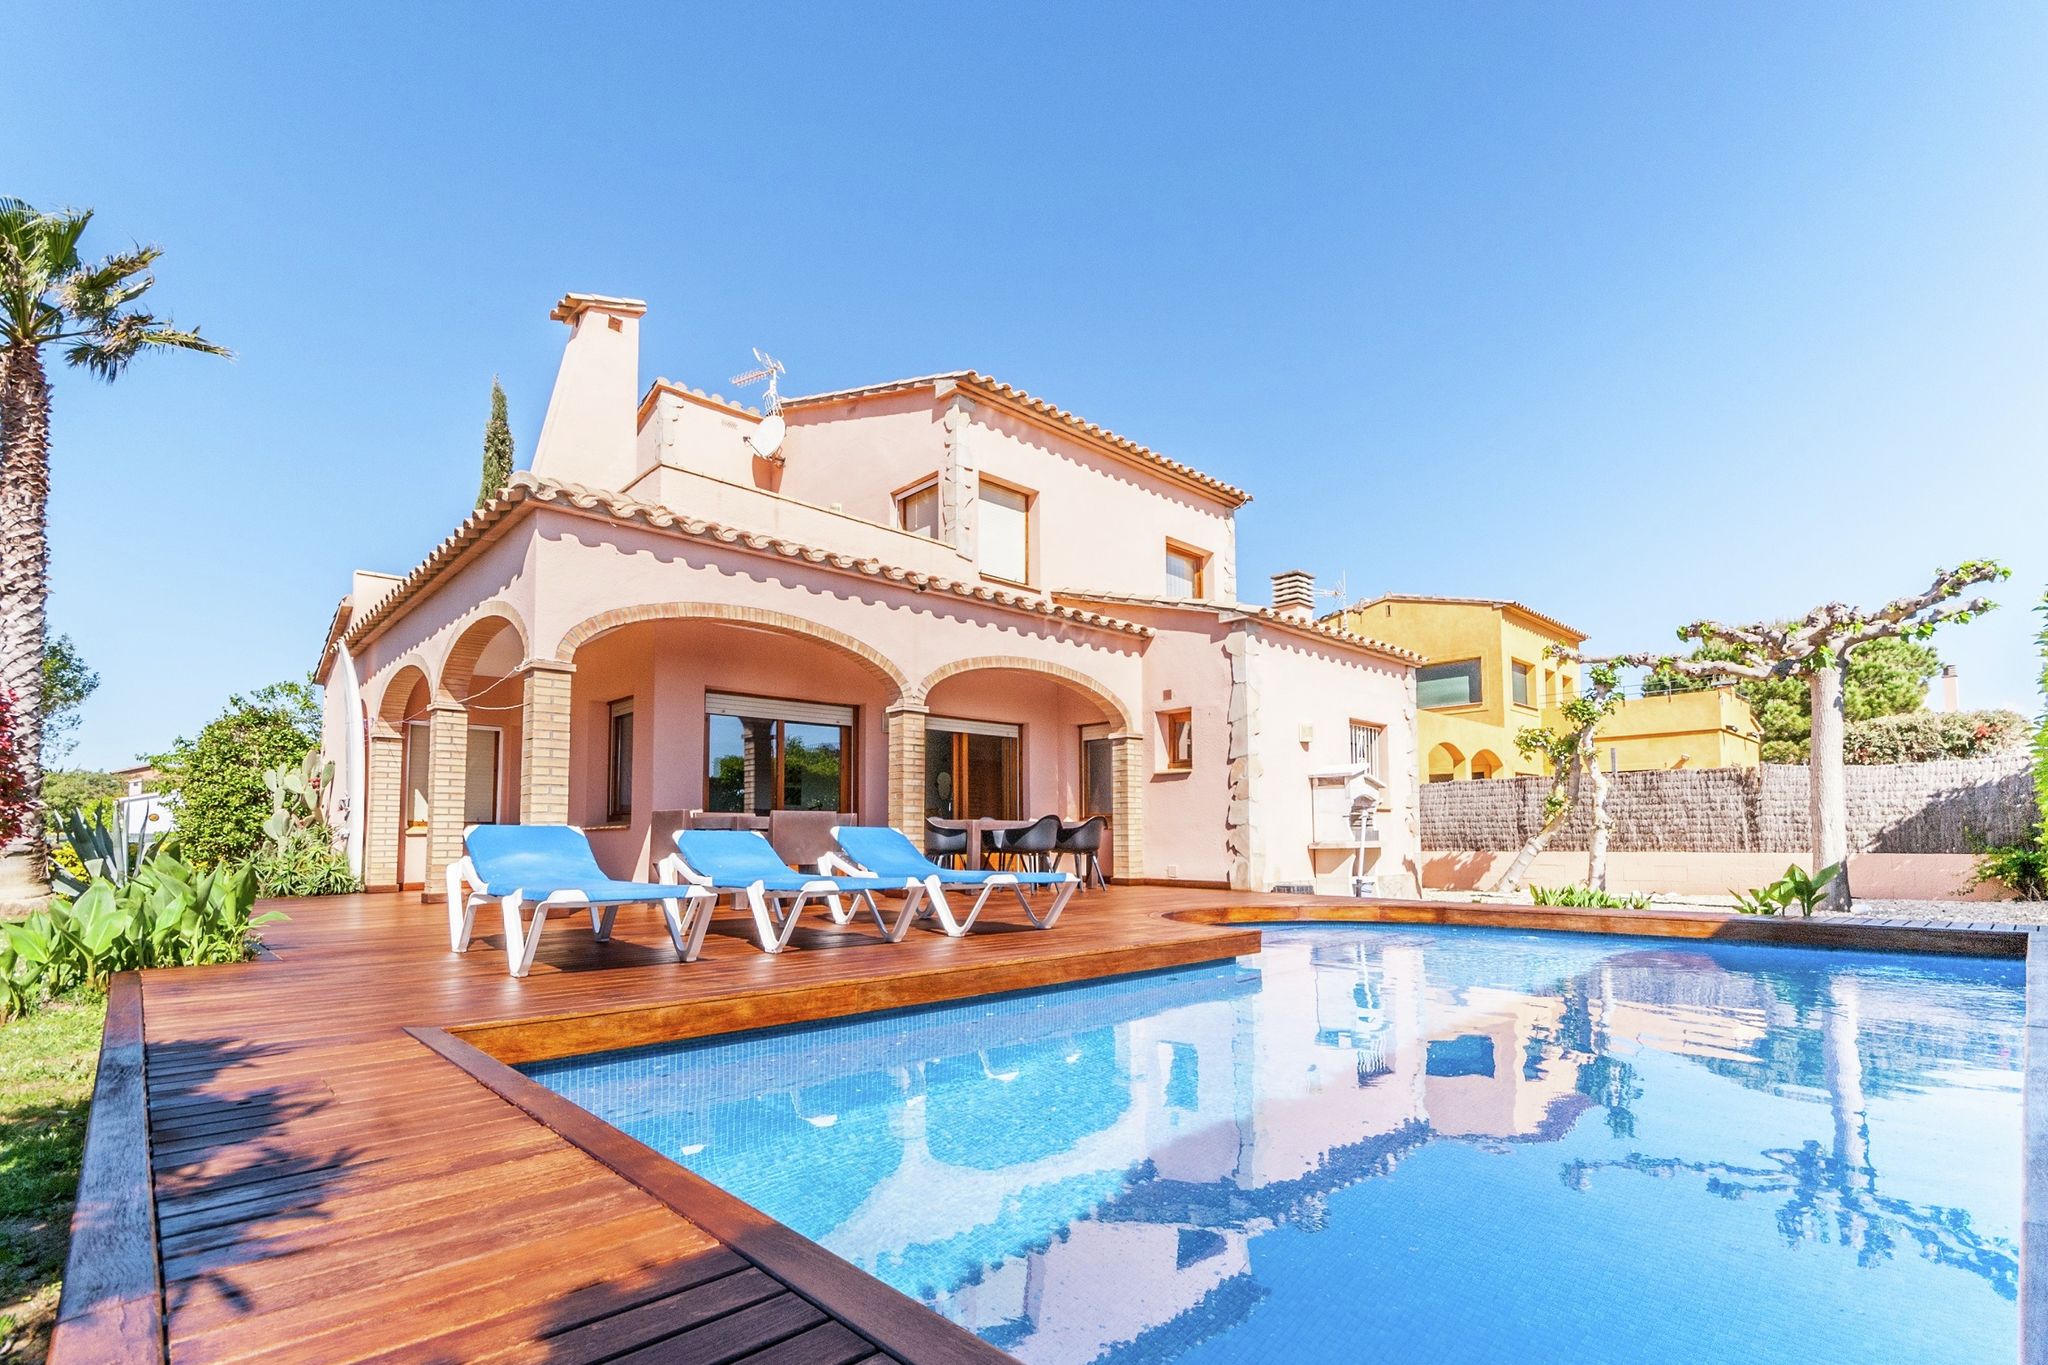 Luxurious Villa St Pere Pescador with Swimming Pool